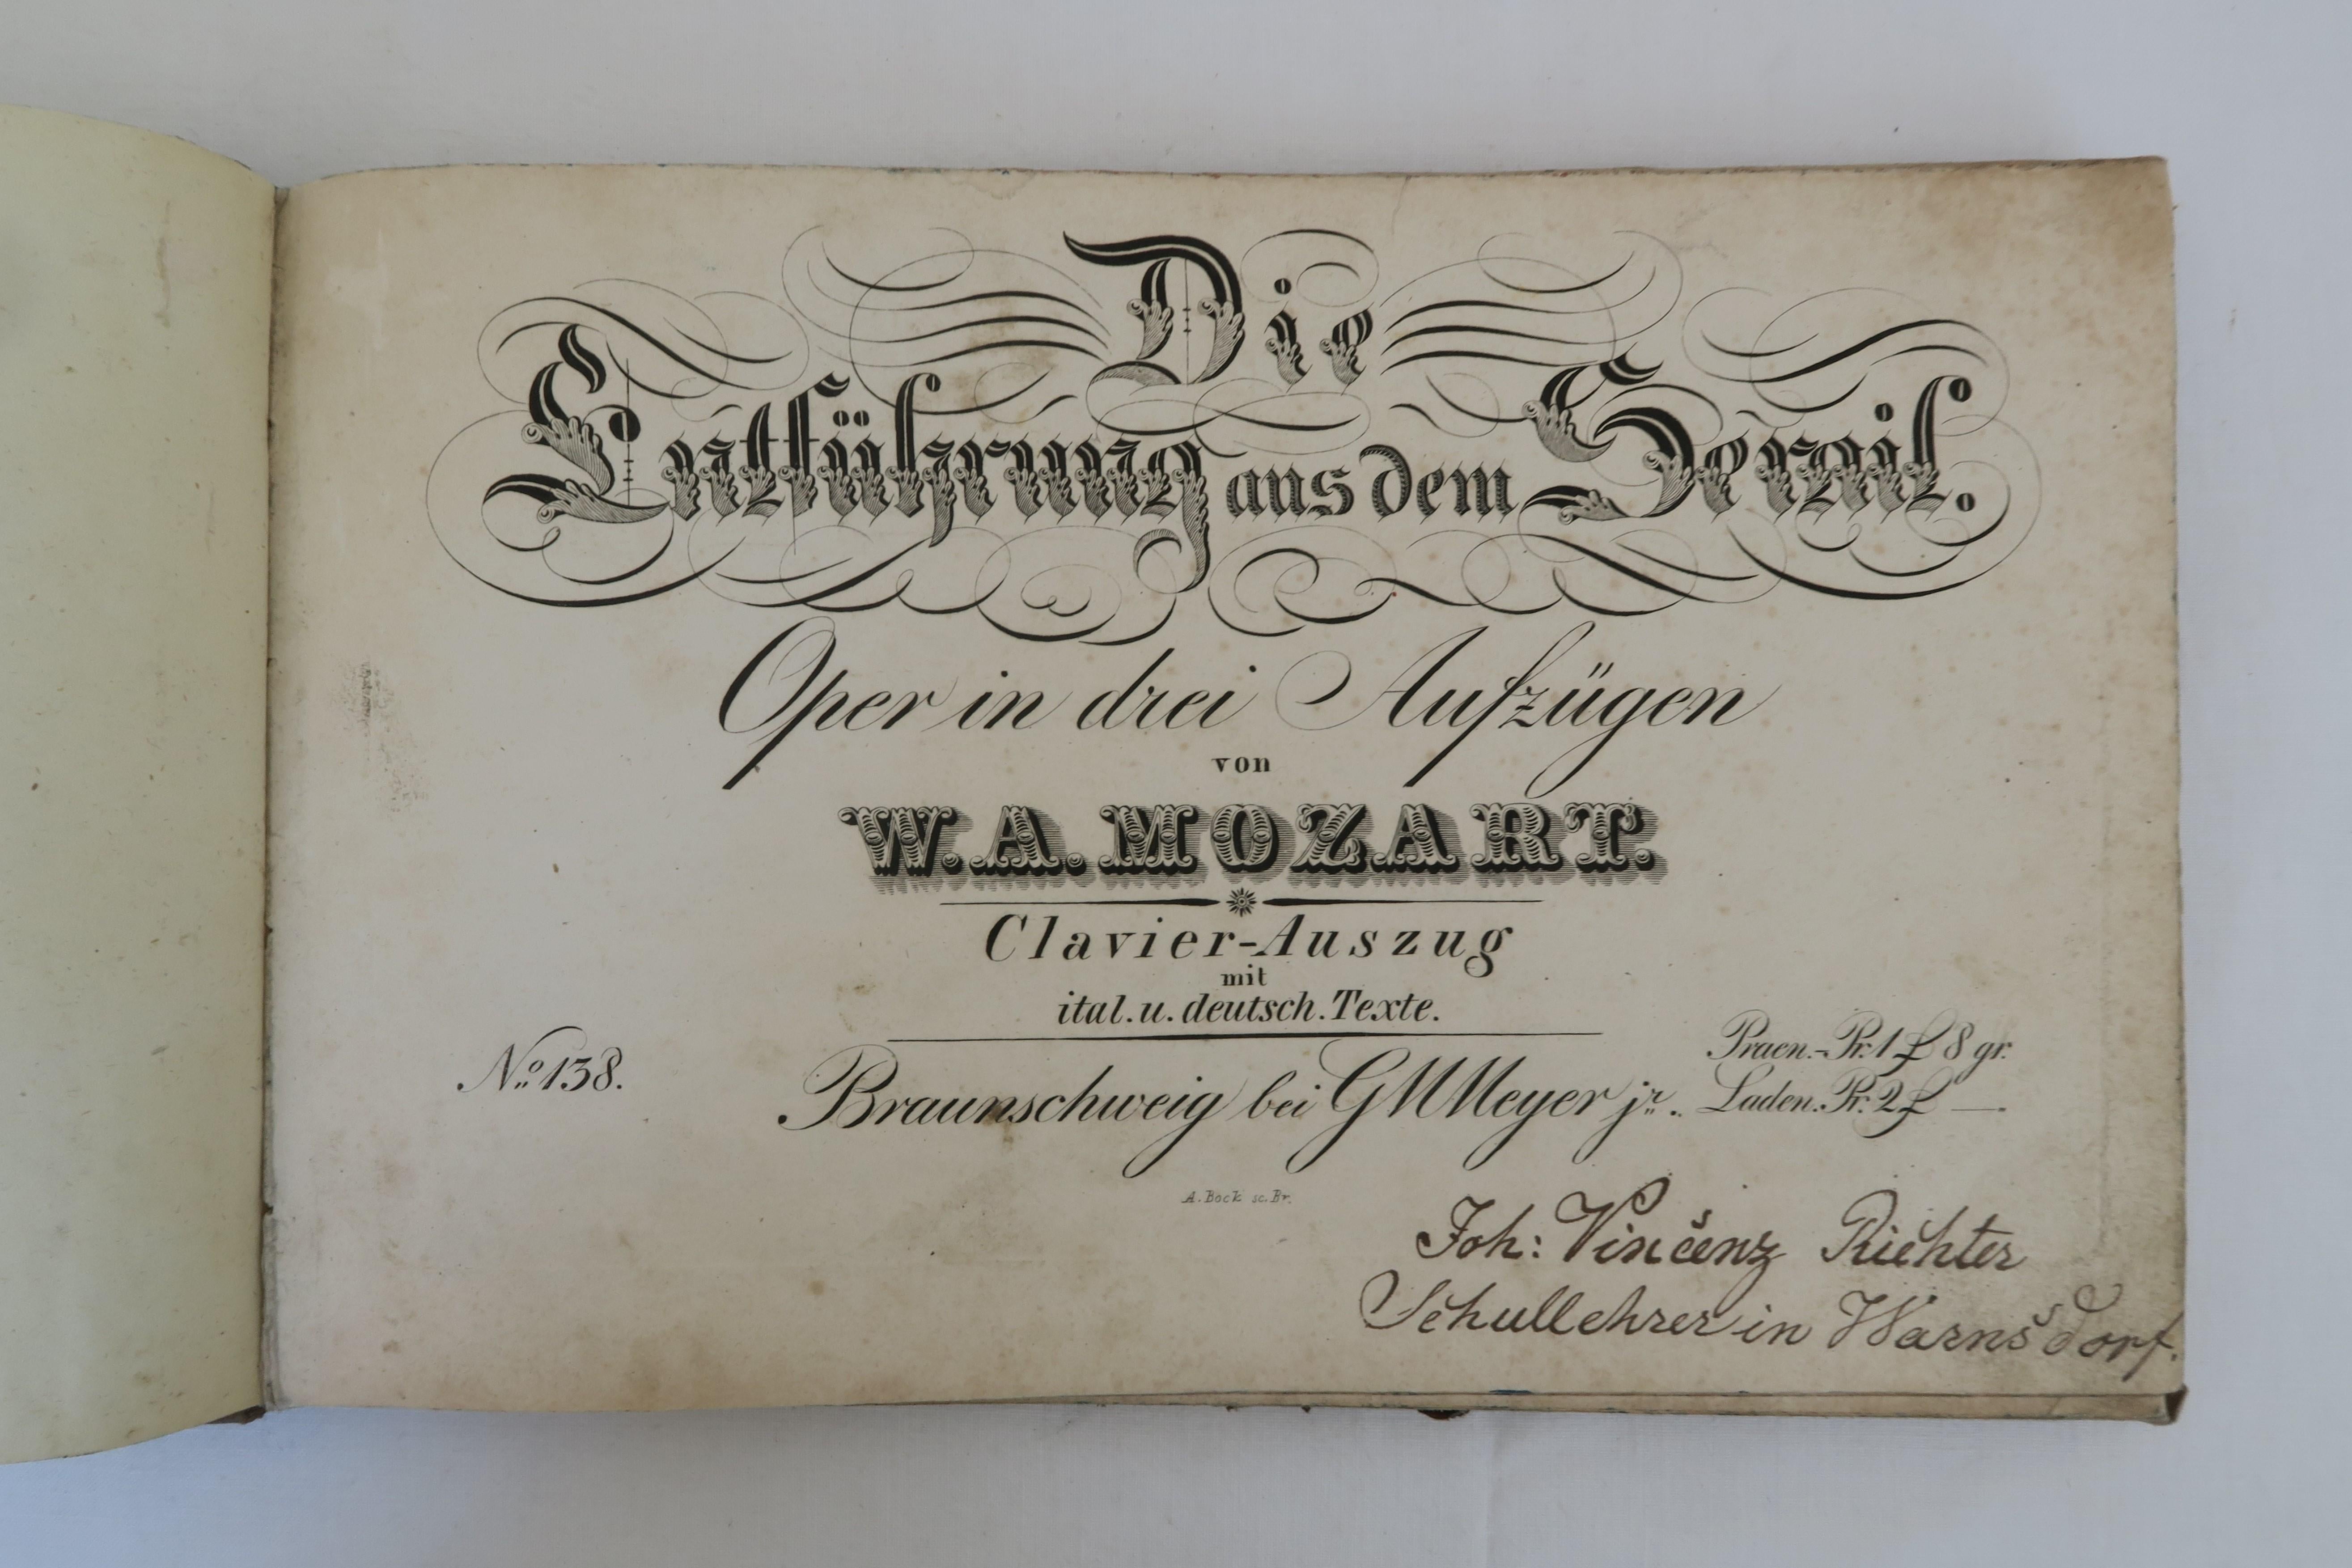 For sale are three piano arrangements by Wolfgang Amadeus Mozart. The sheet books were owned by Austrian teacher, conductor and organist Johann Vinzenz Richter. The pieces are 